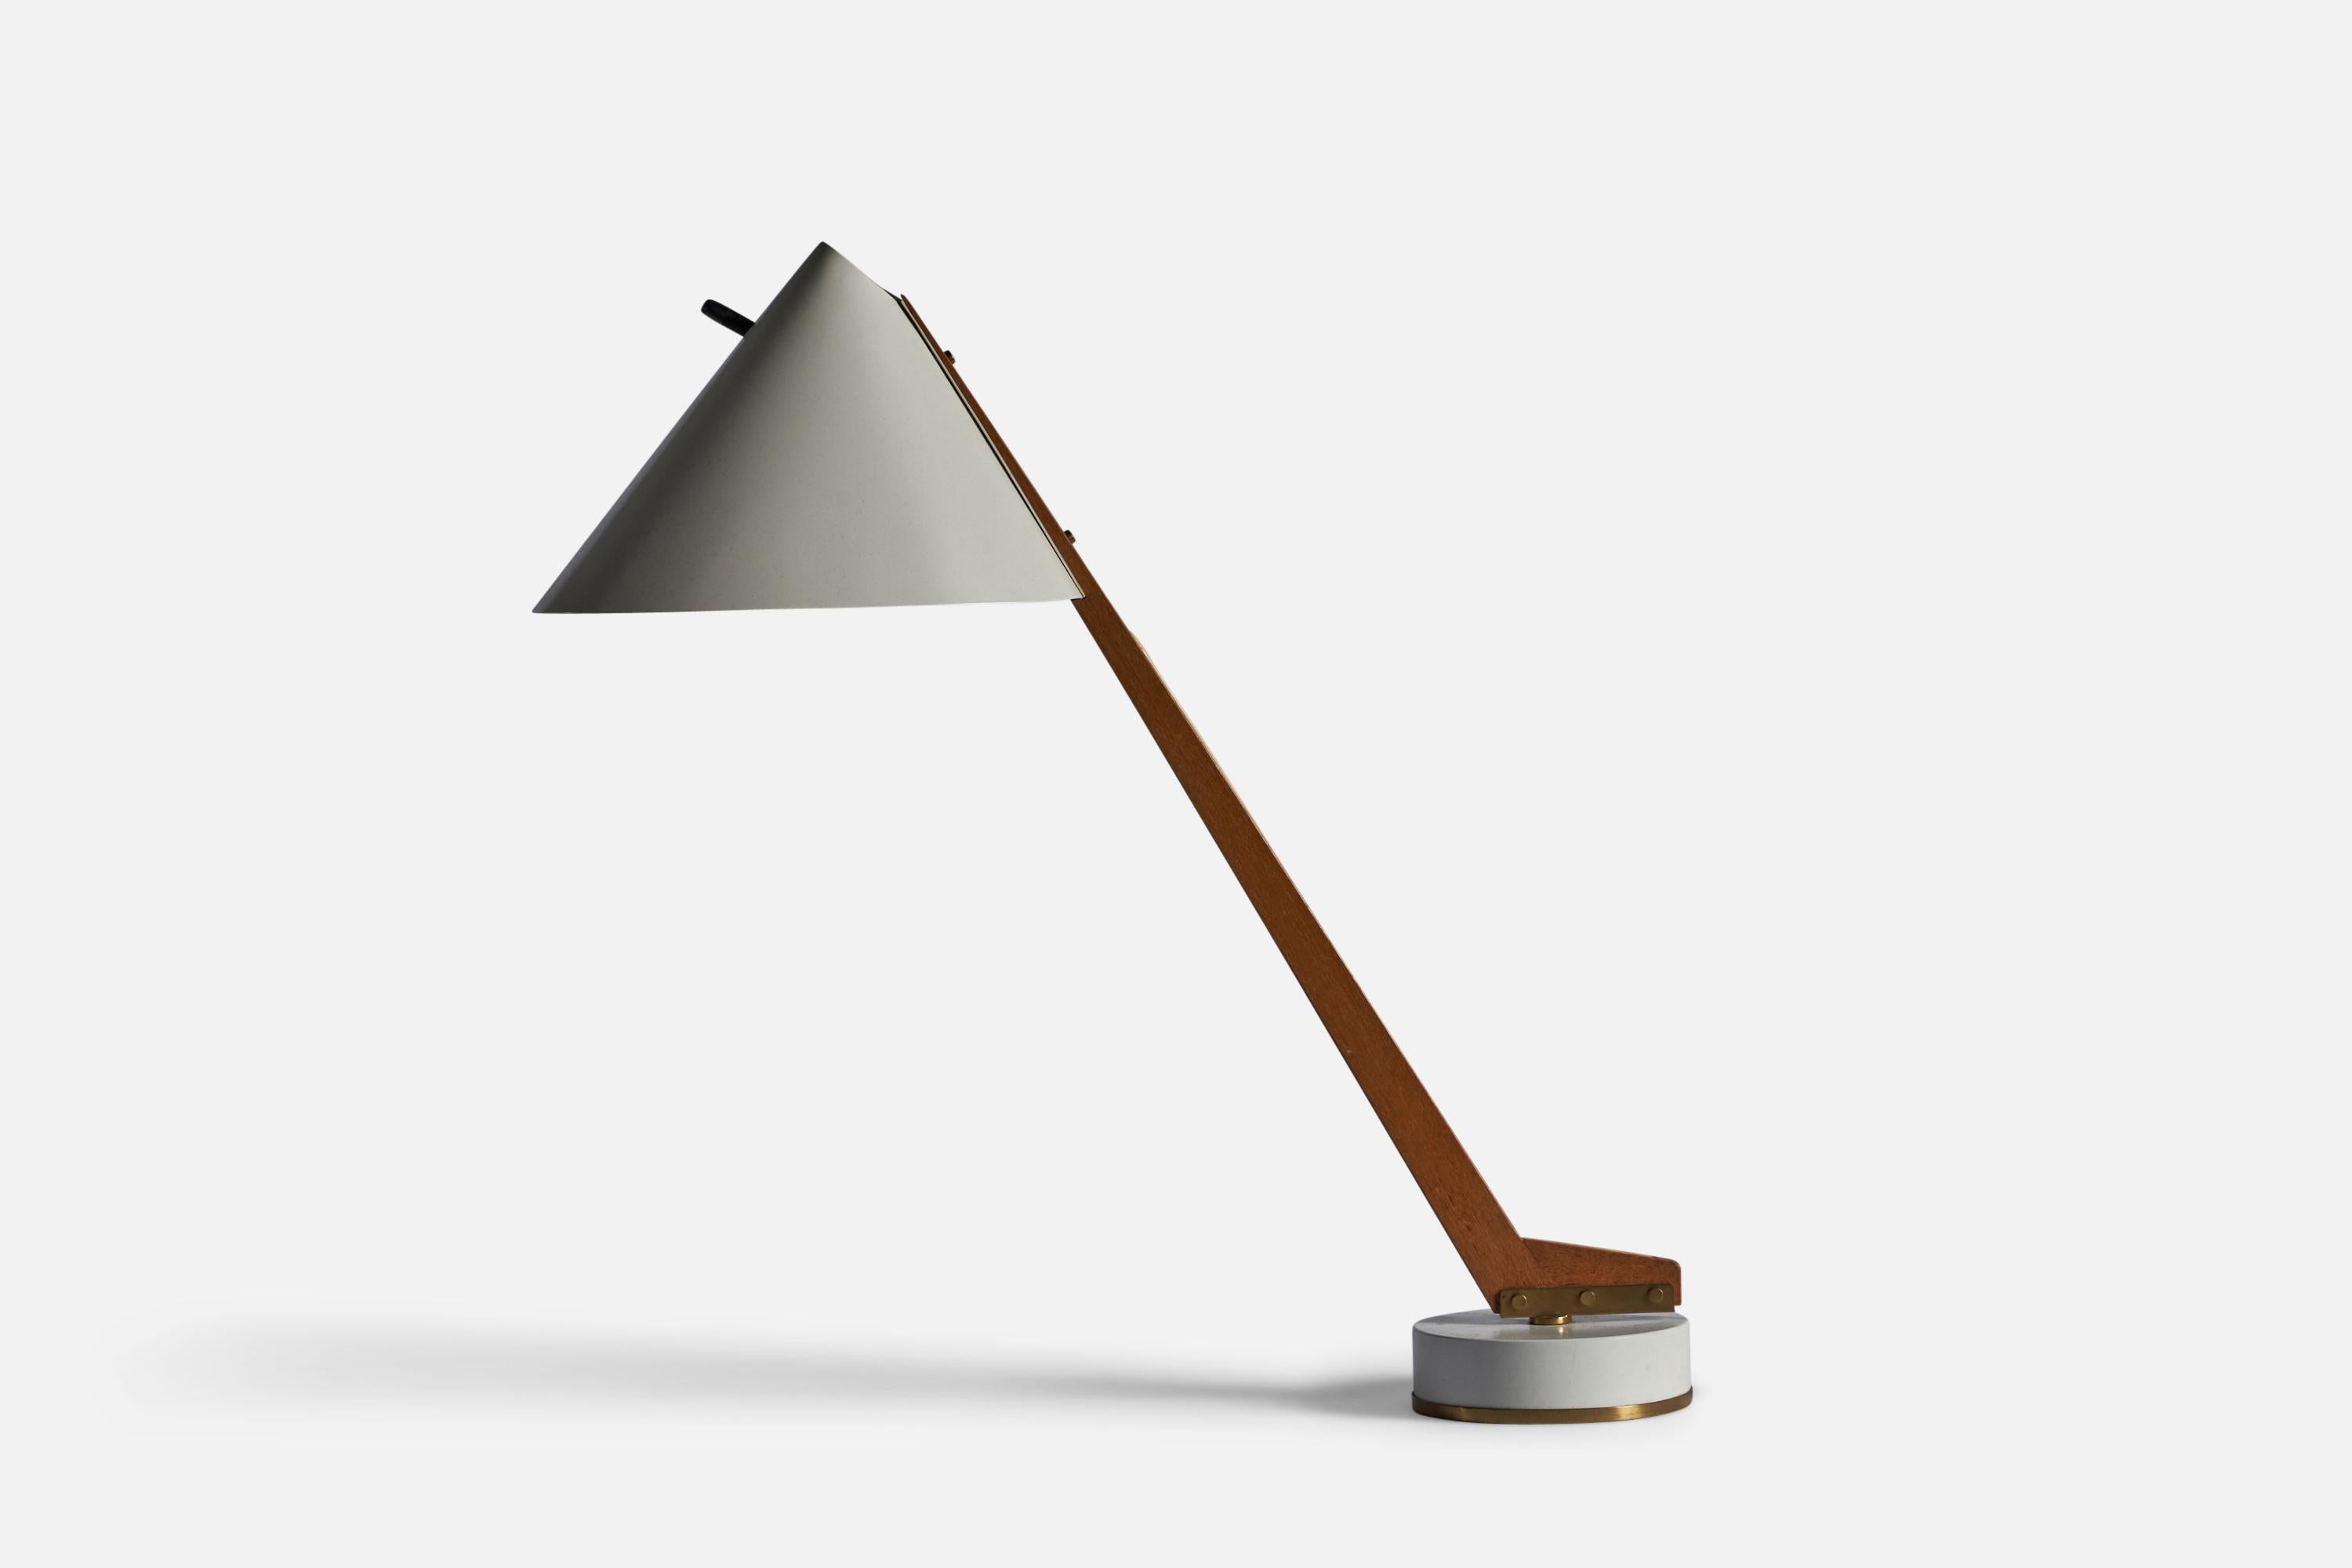 A brass, teak and white-lacquered metal table lamp designed and produced by Hans-Agne Jakobsson, Markaryd, Sweden, c. 1960s.

Overall Dimensions: 24